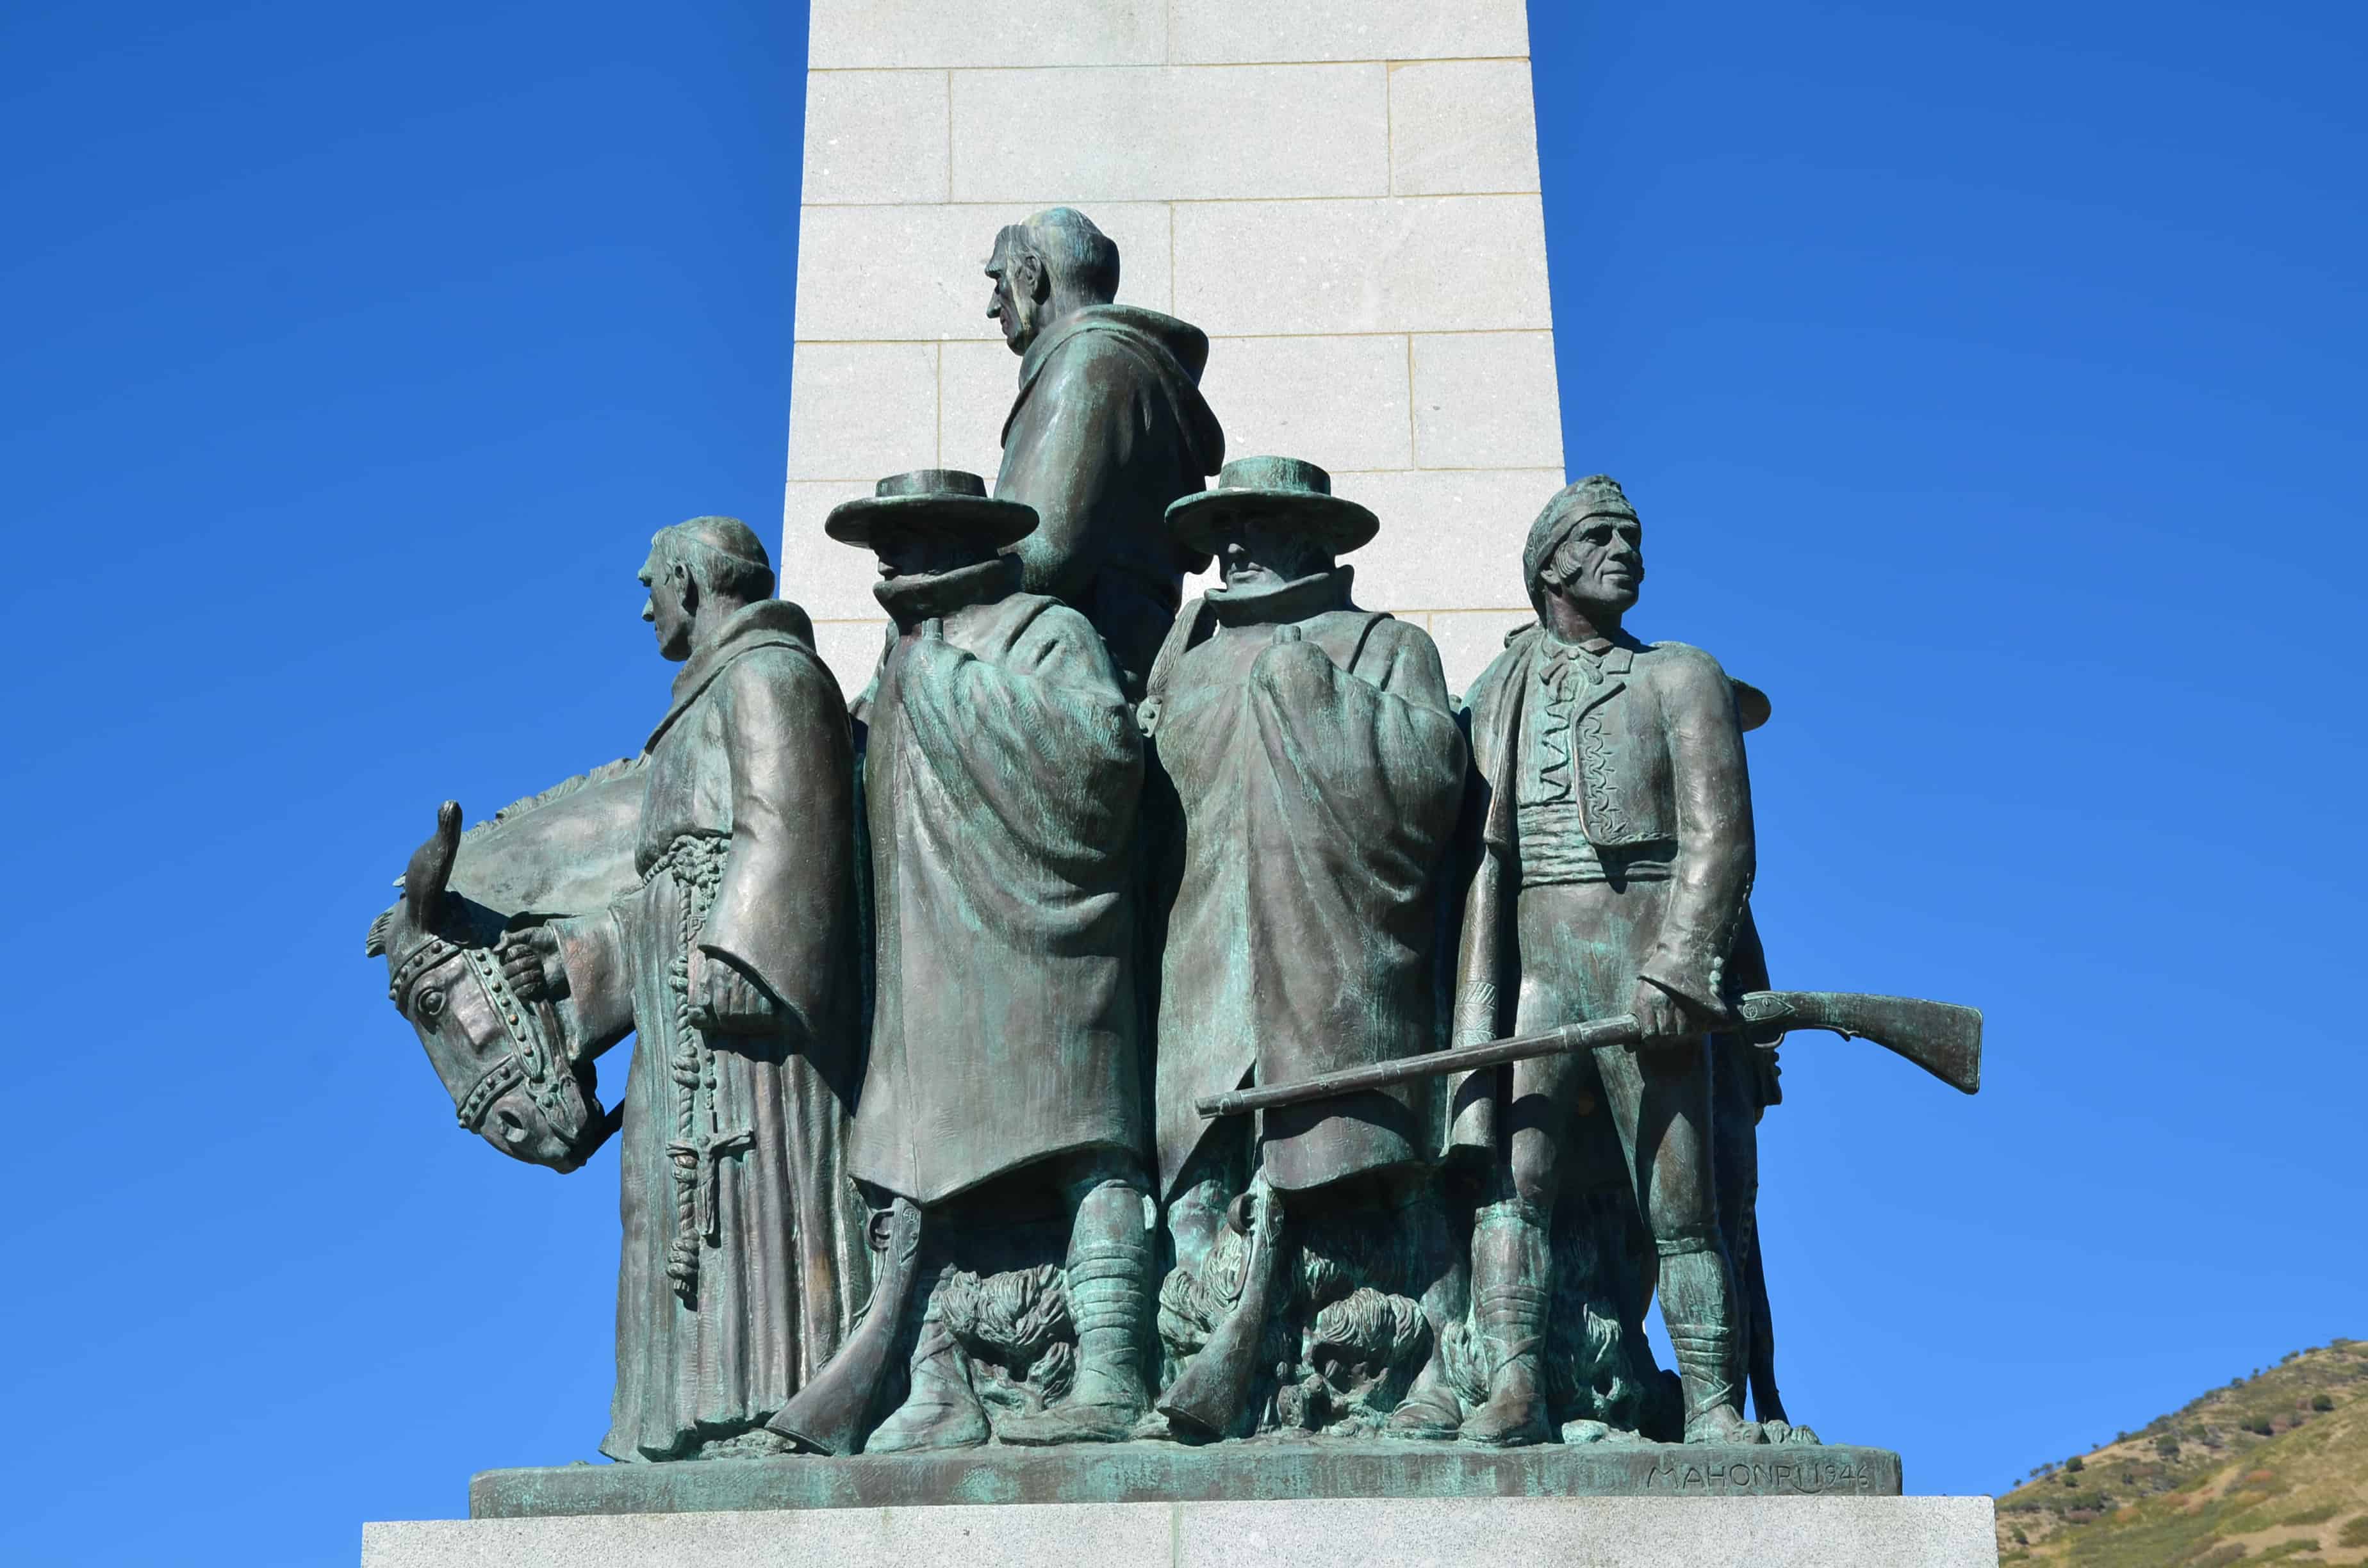 Domínguez-Escalante Expedition on the This Is the Place Monument in Salt Lake City, Utah